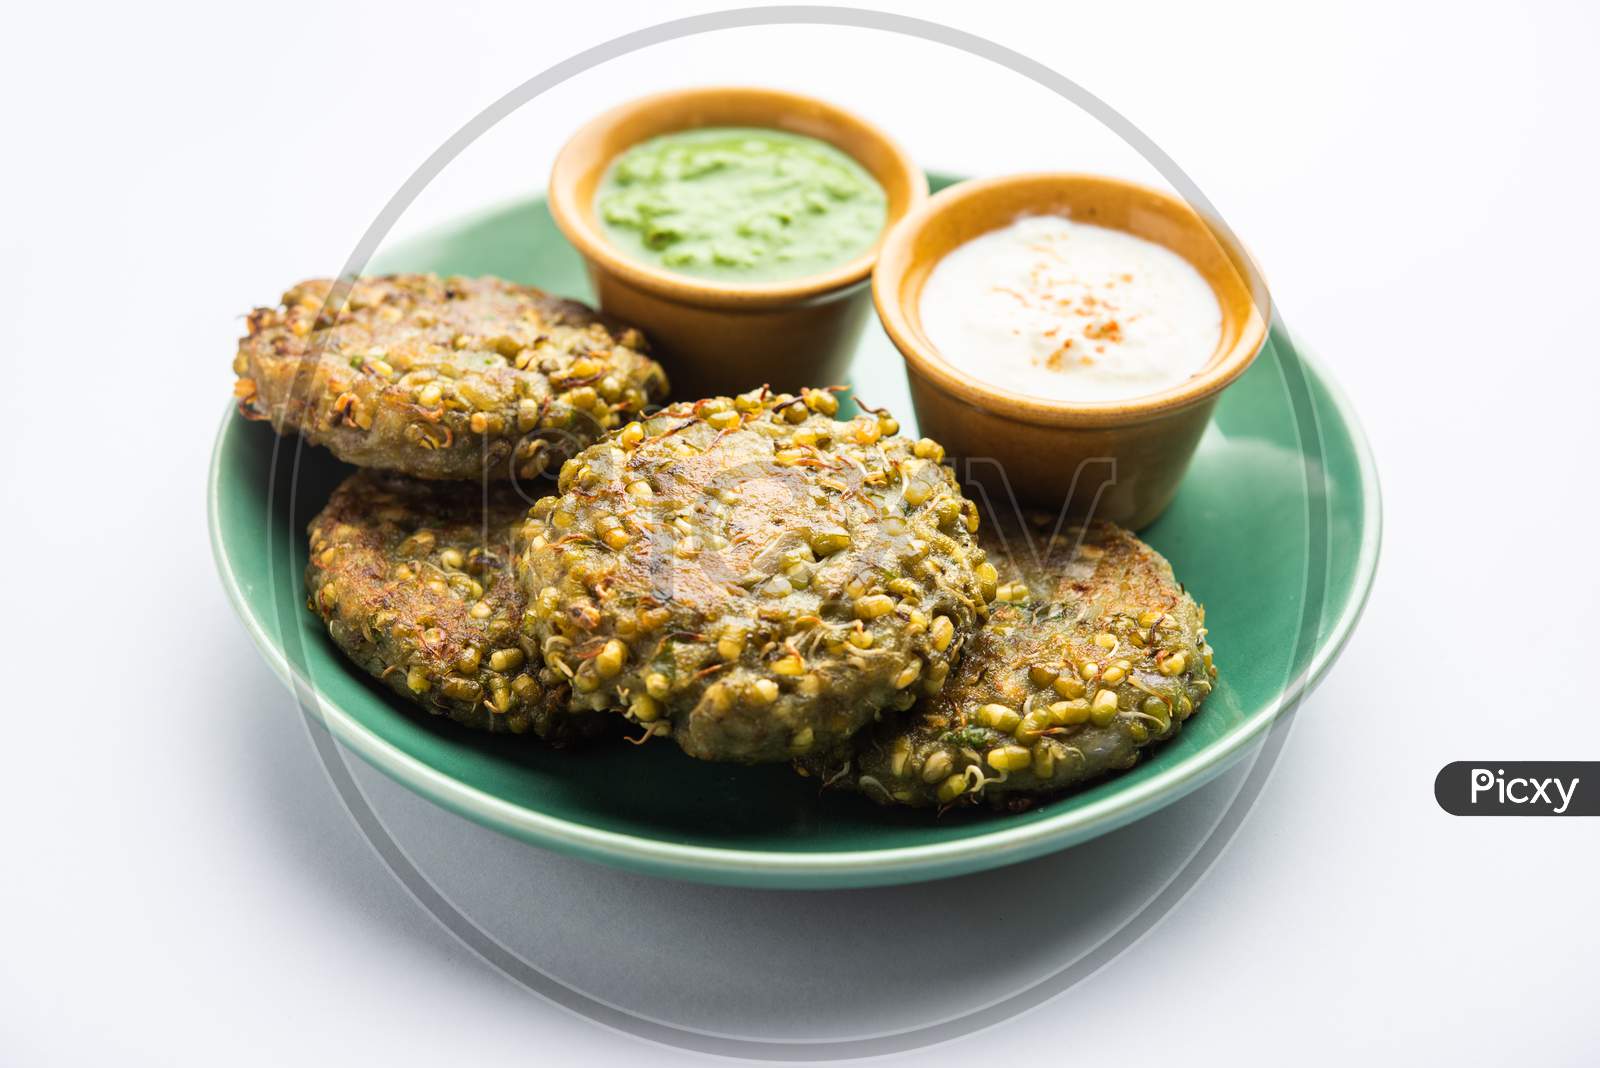 Sprouted Moong Dal Tikki Or Patties Is A Healthy Snack From India Served With Green Chutney And Curd